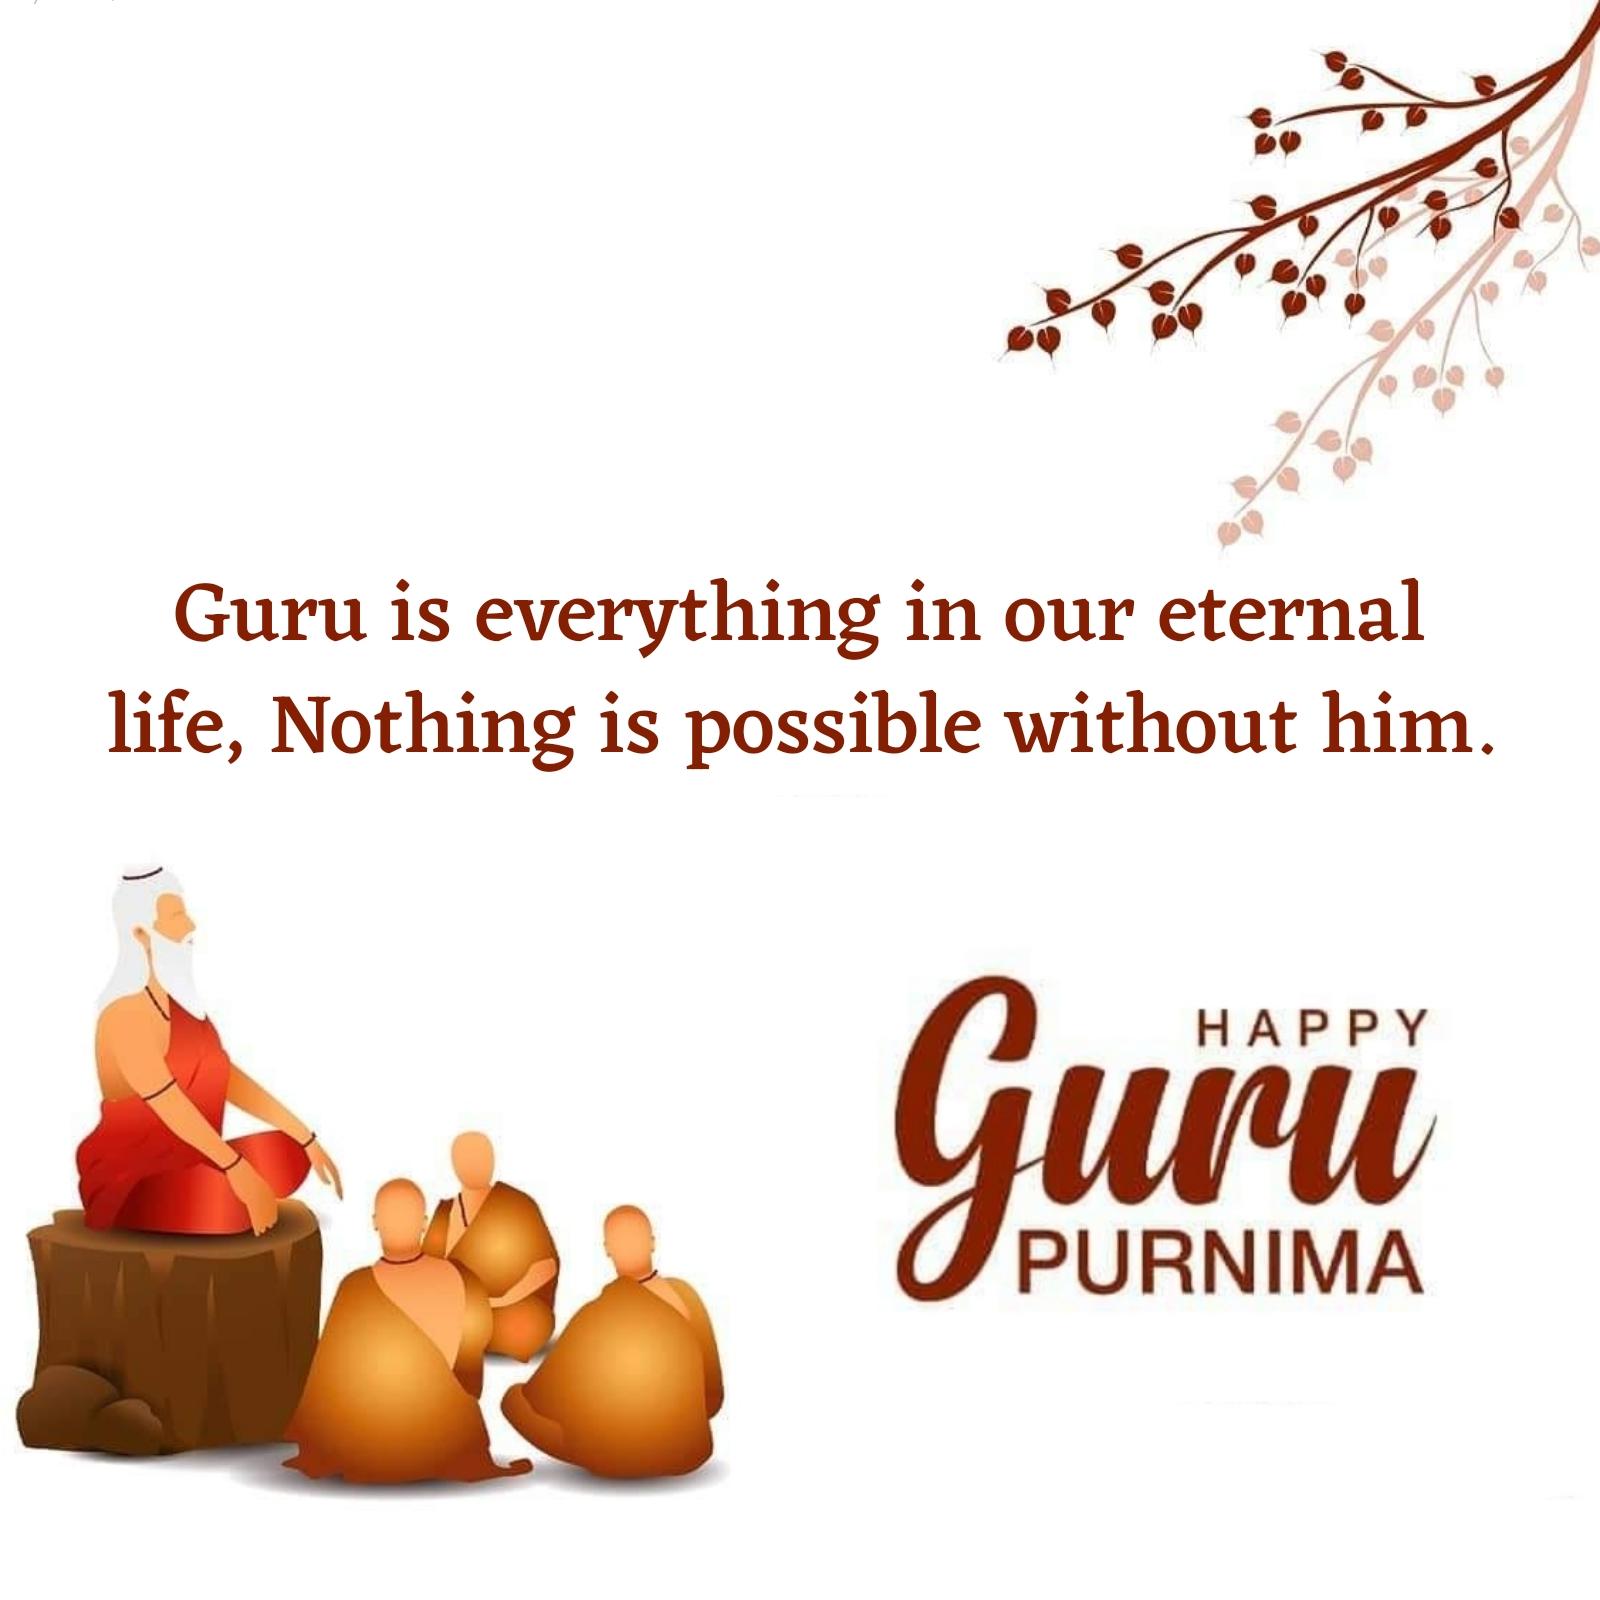 Guru is everything in our eternal life Nothing is possible without him